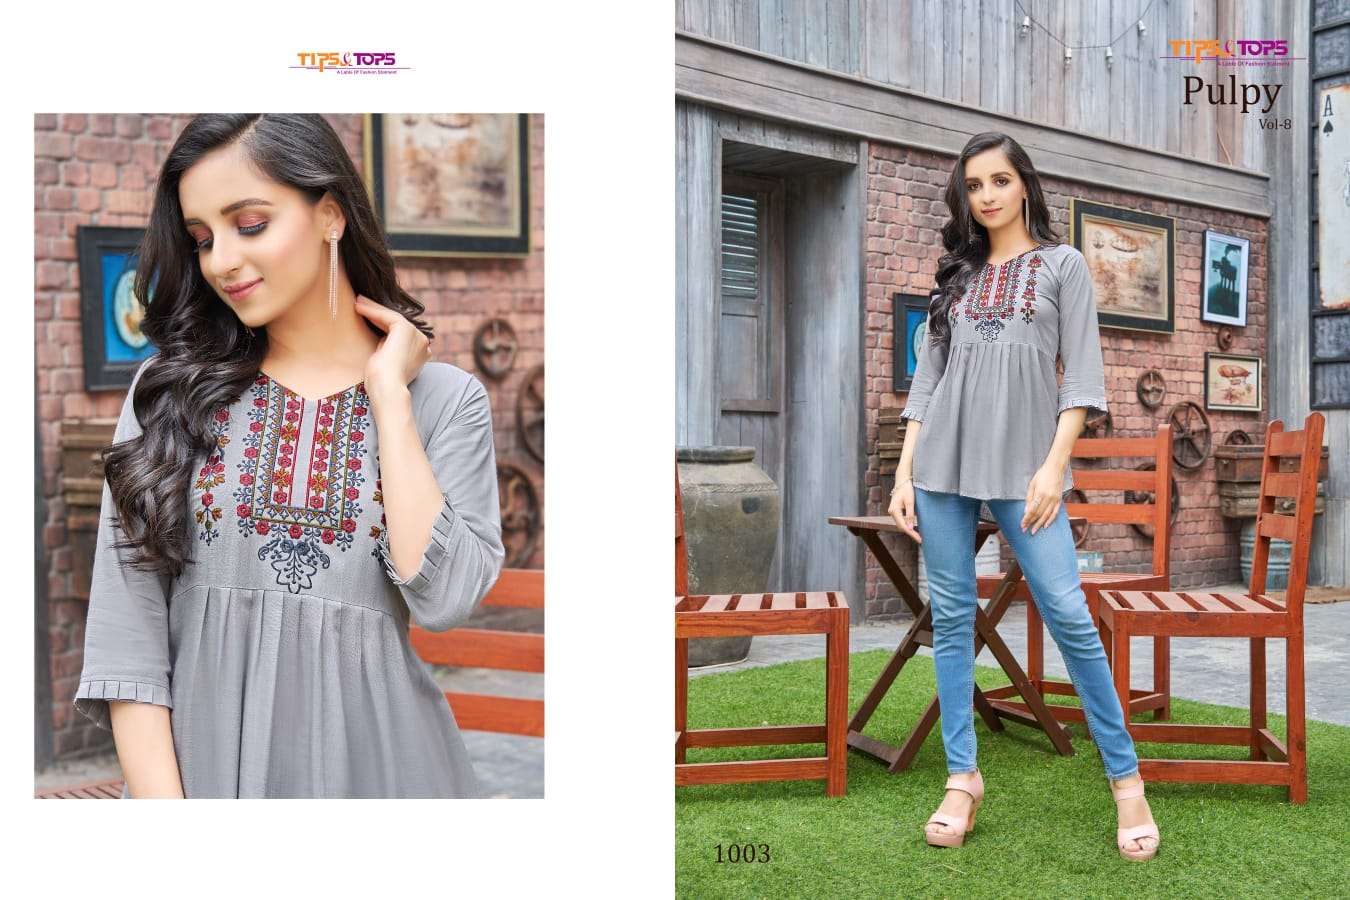 TIPS AND TOPS PULPY VOL 8 LAUNCHING NEW CATALOG WHOLESALER SURAT